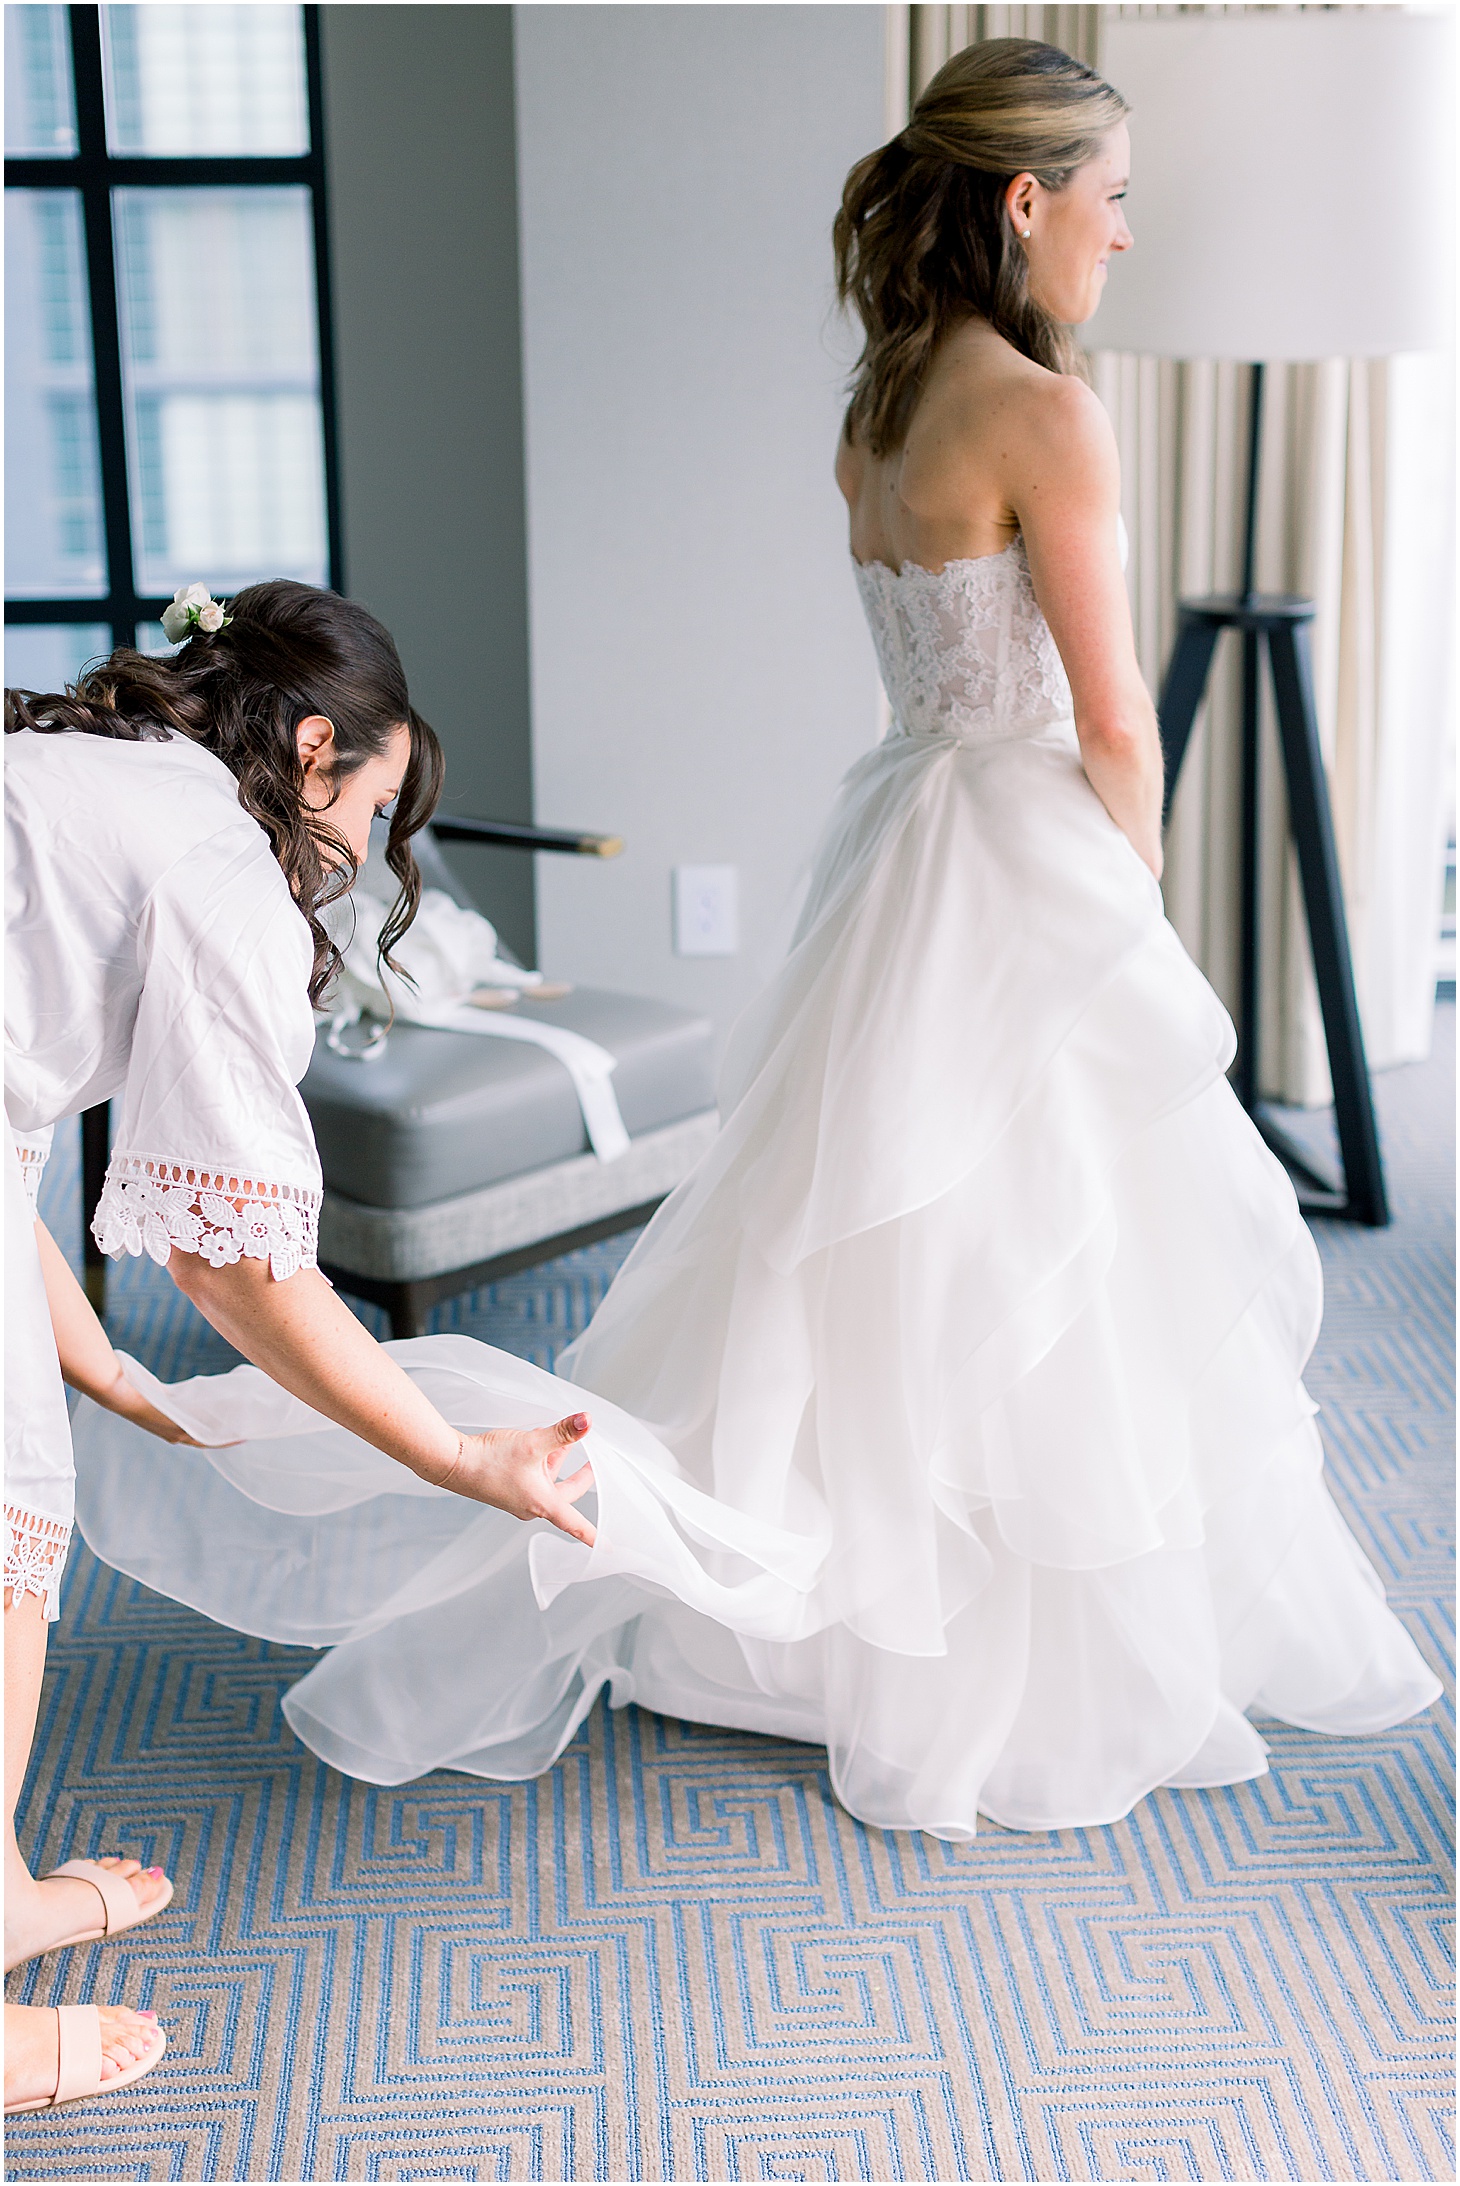 Reem Acra Wedding Dress, Bride Getting Ready at Inter-Continental Hotel at Navy Yards in DC, Modern Textural Spring Wedding at District Winery, Sarah Bradshaw Photography, DC Wedding Photographer